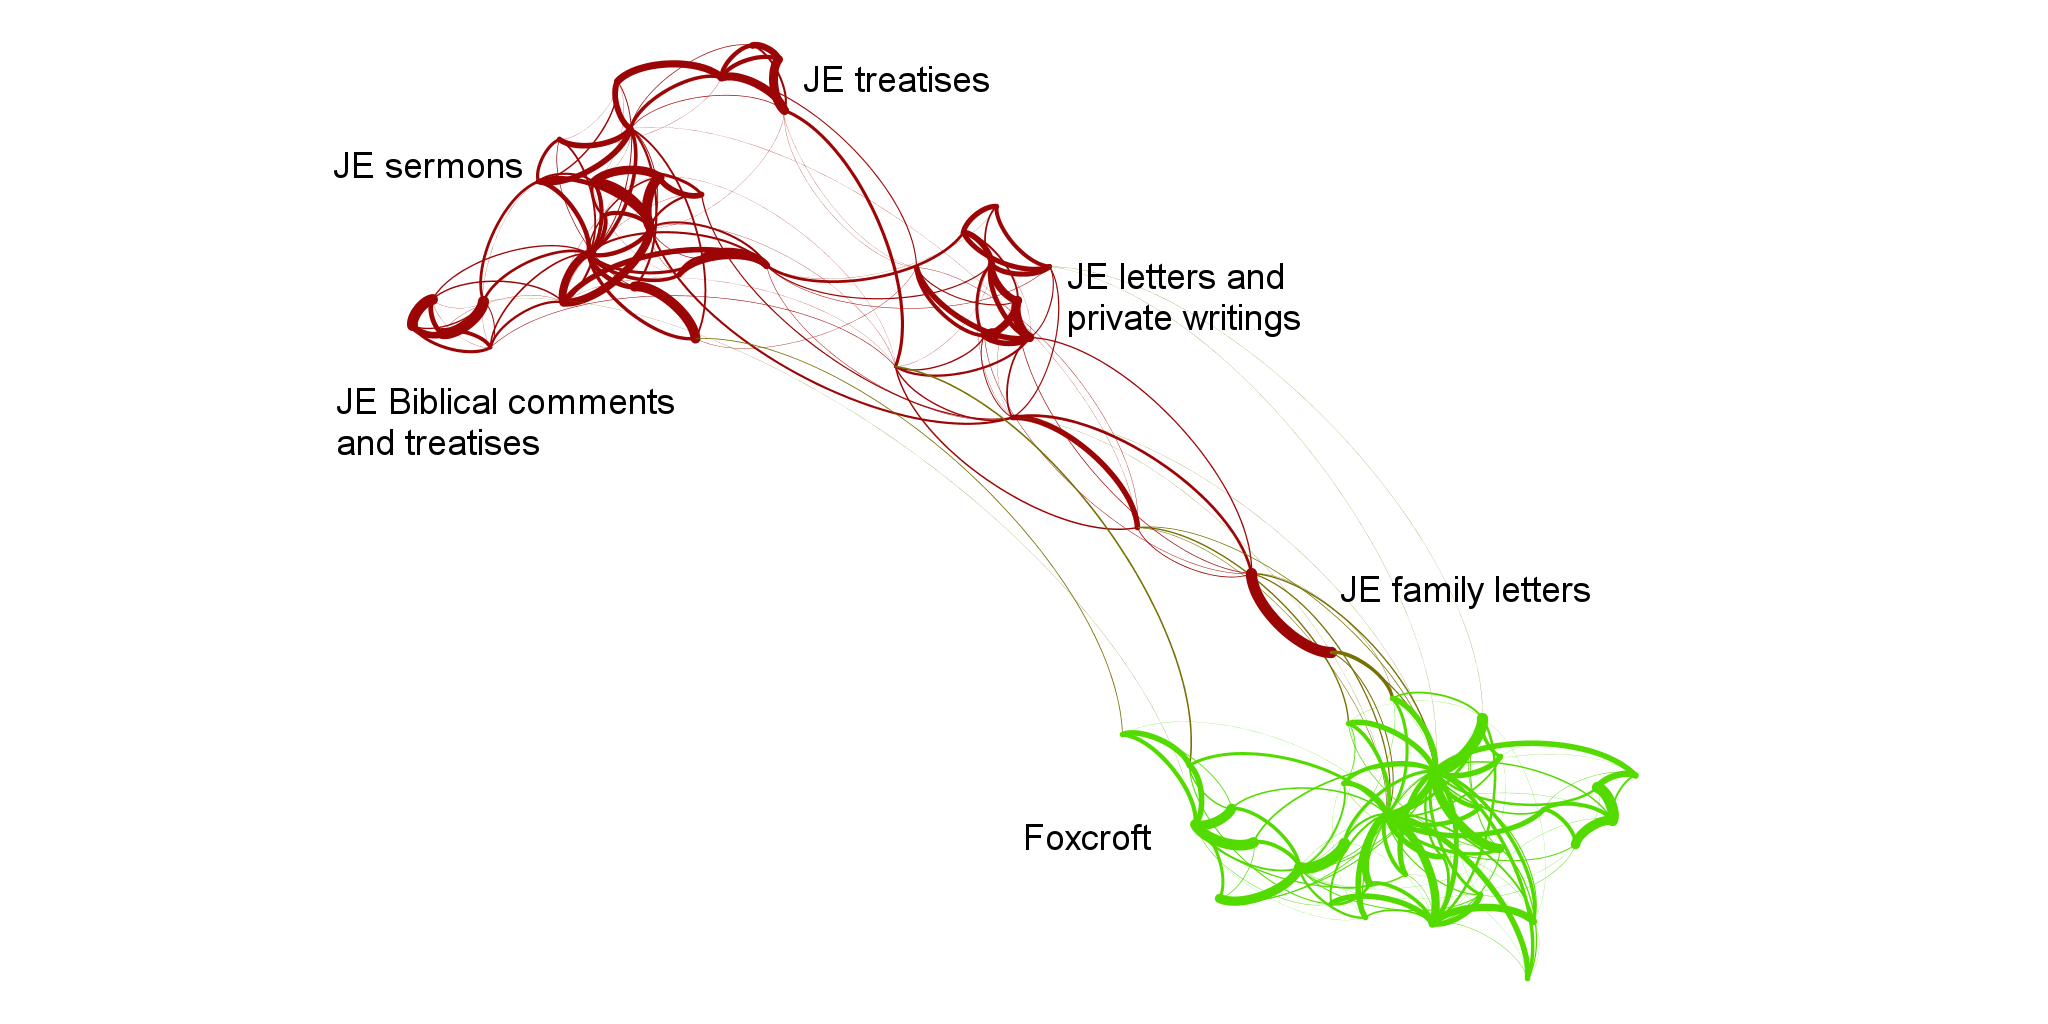 Figure 1. Network analysis of texts by Edwards (red) and Foxcroft (green).